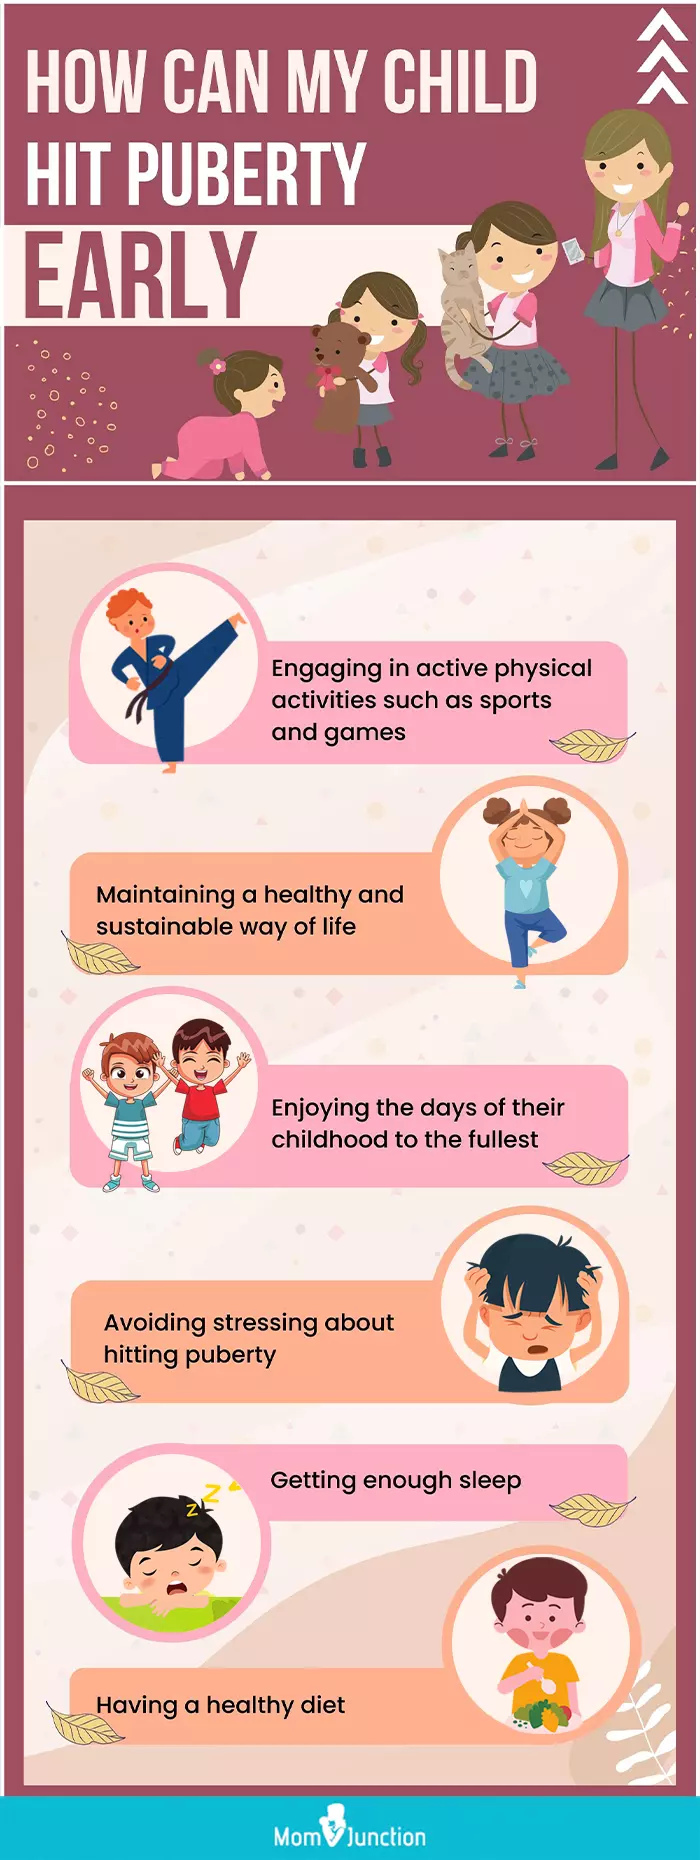 how can my child hit puberty early (infographic)